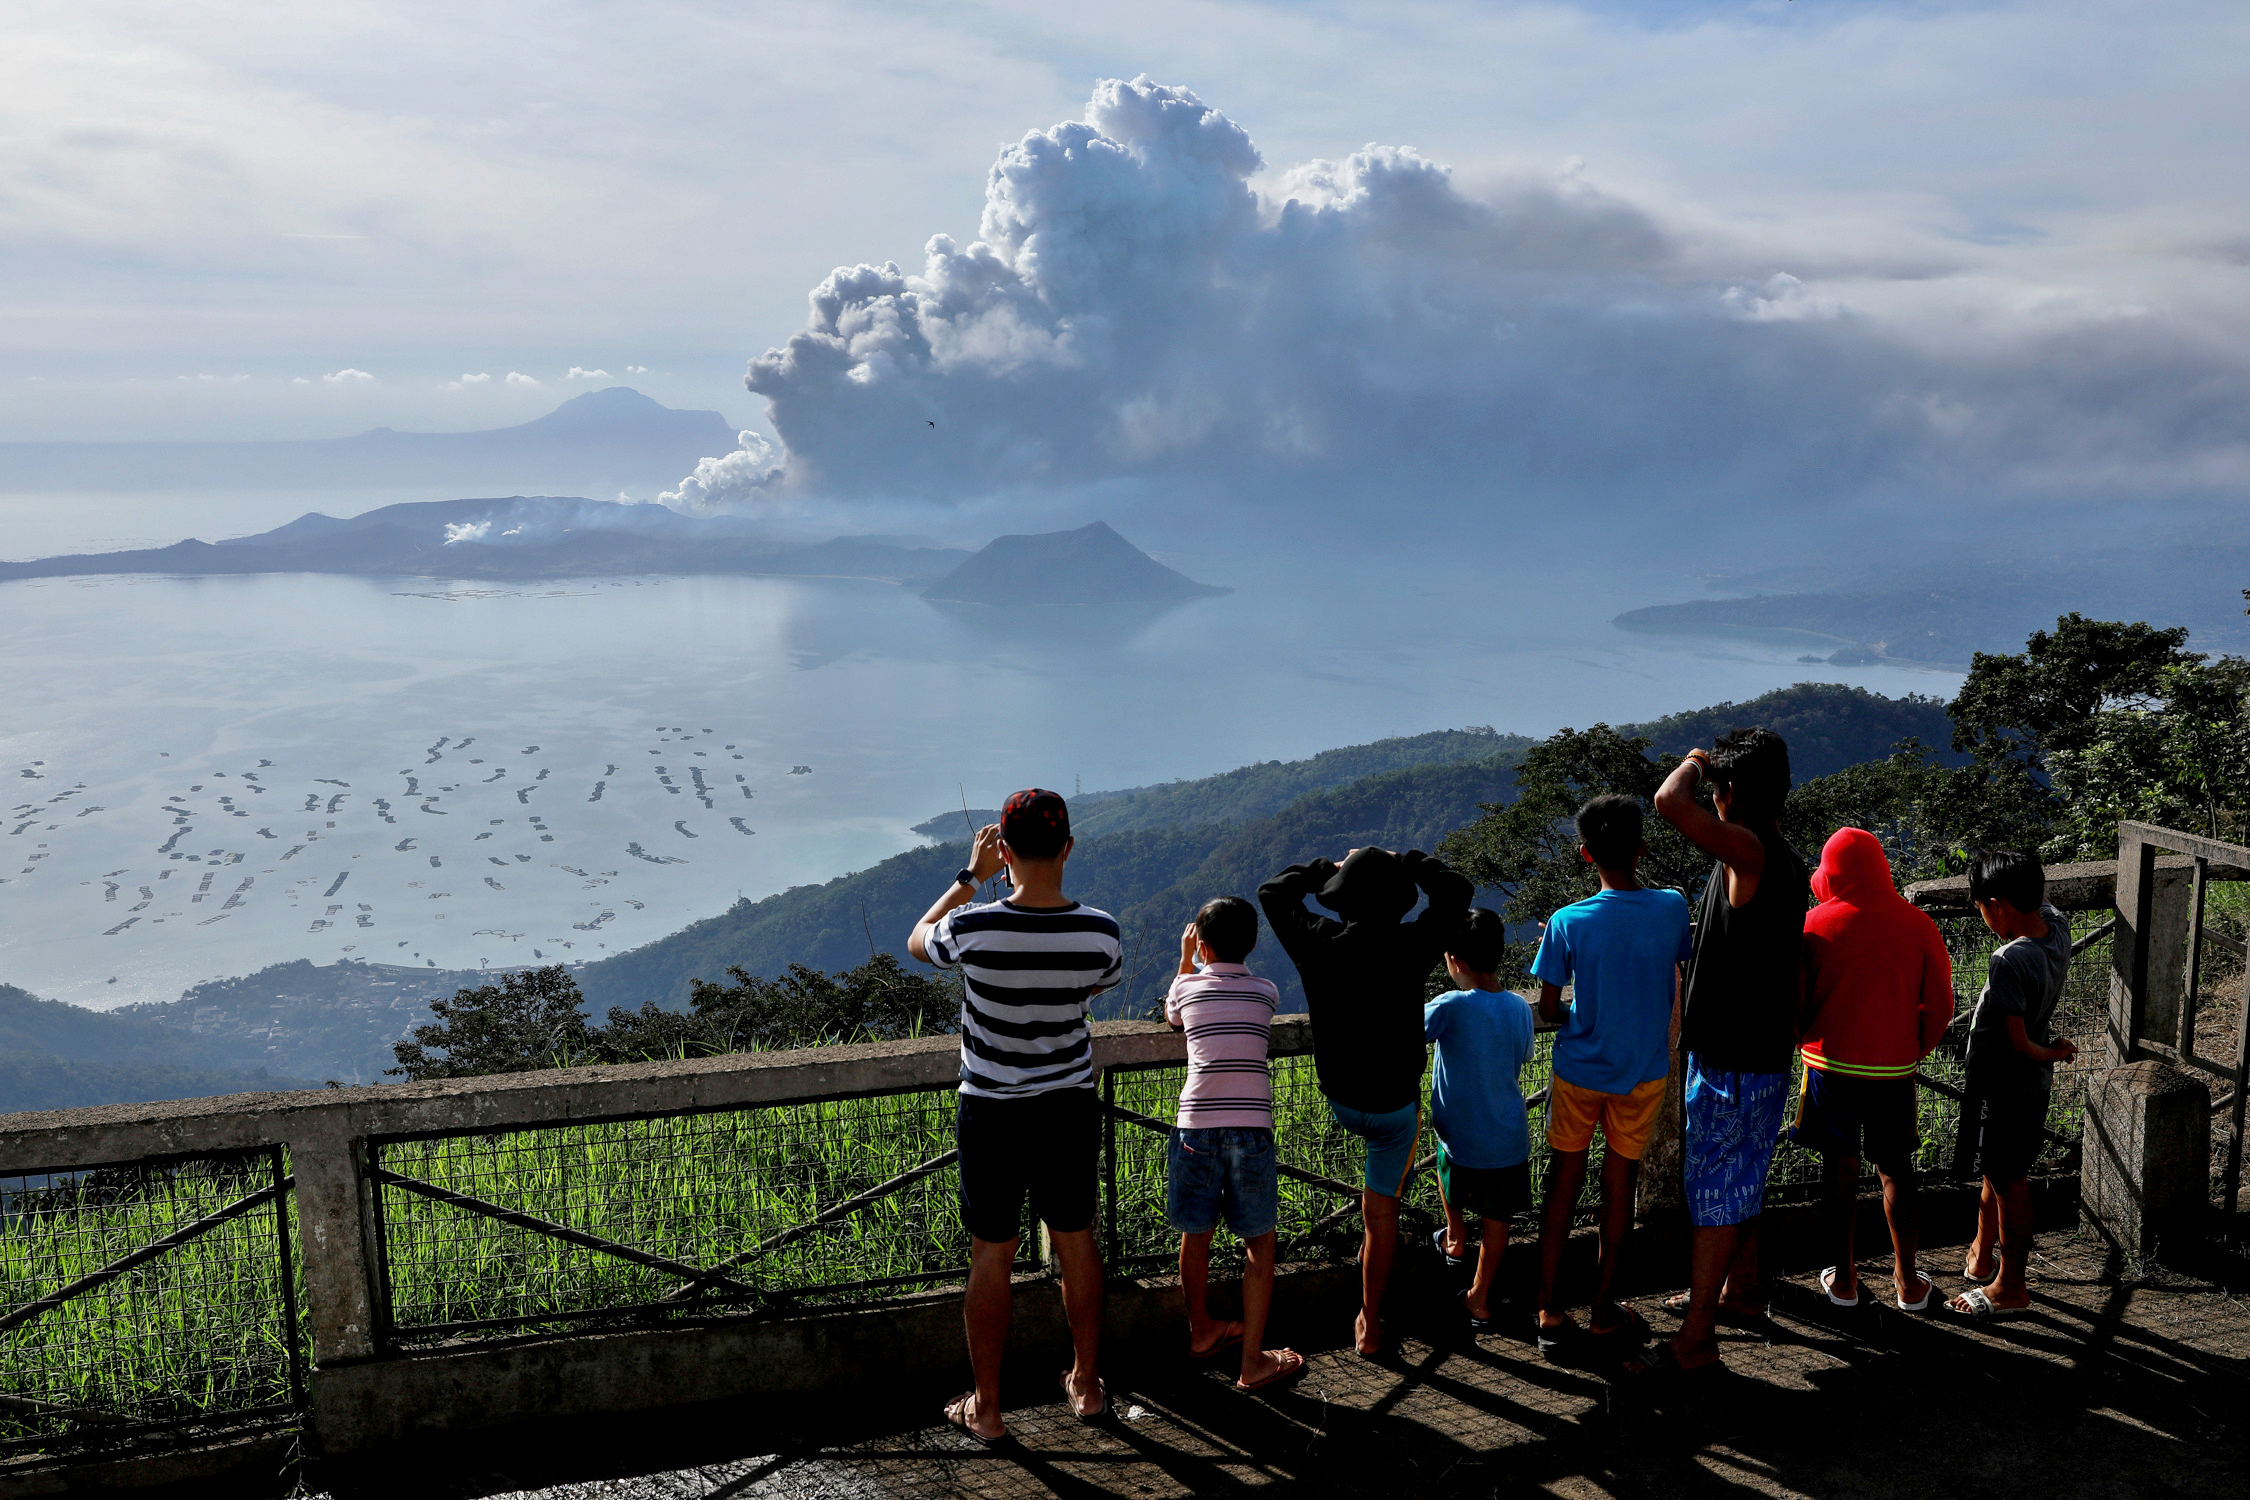 PHOTO: Residents look at the erupting Taal Volcano in Tagaytay City, Philippines, January 13, 2020. REUTERS/Eloisa Lopez     TPX IMAGES OF THE DAY